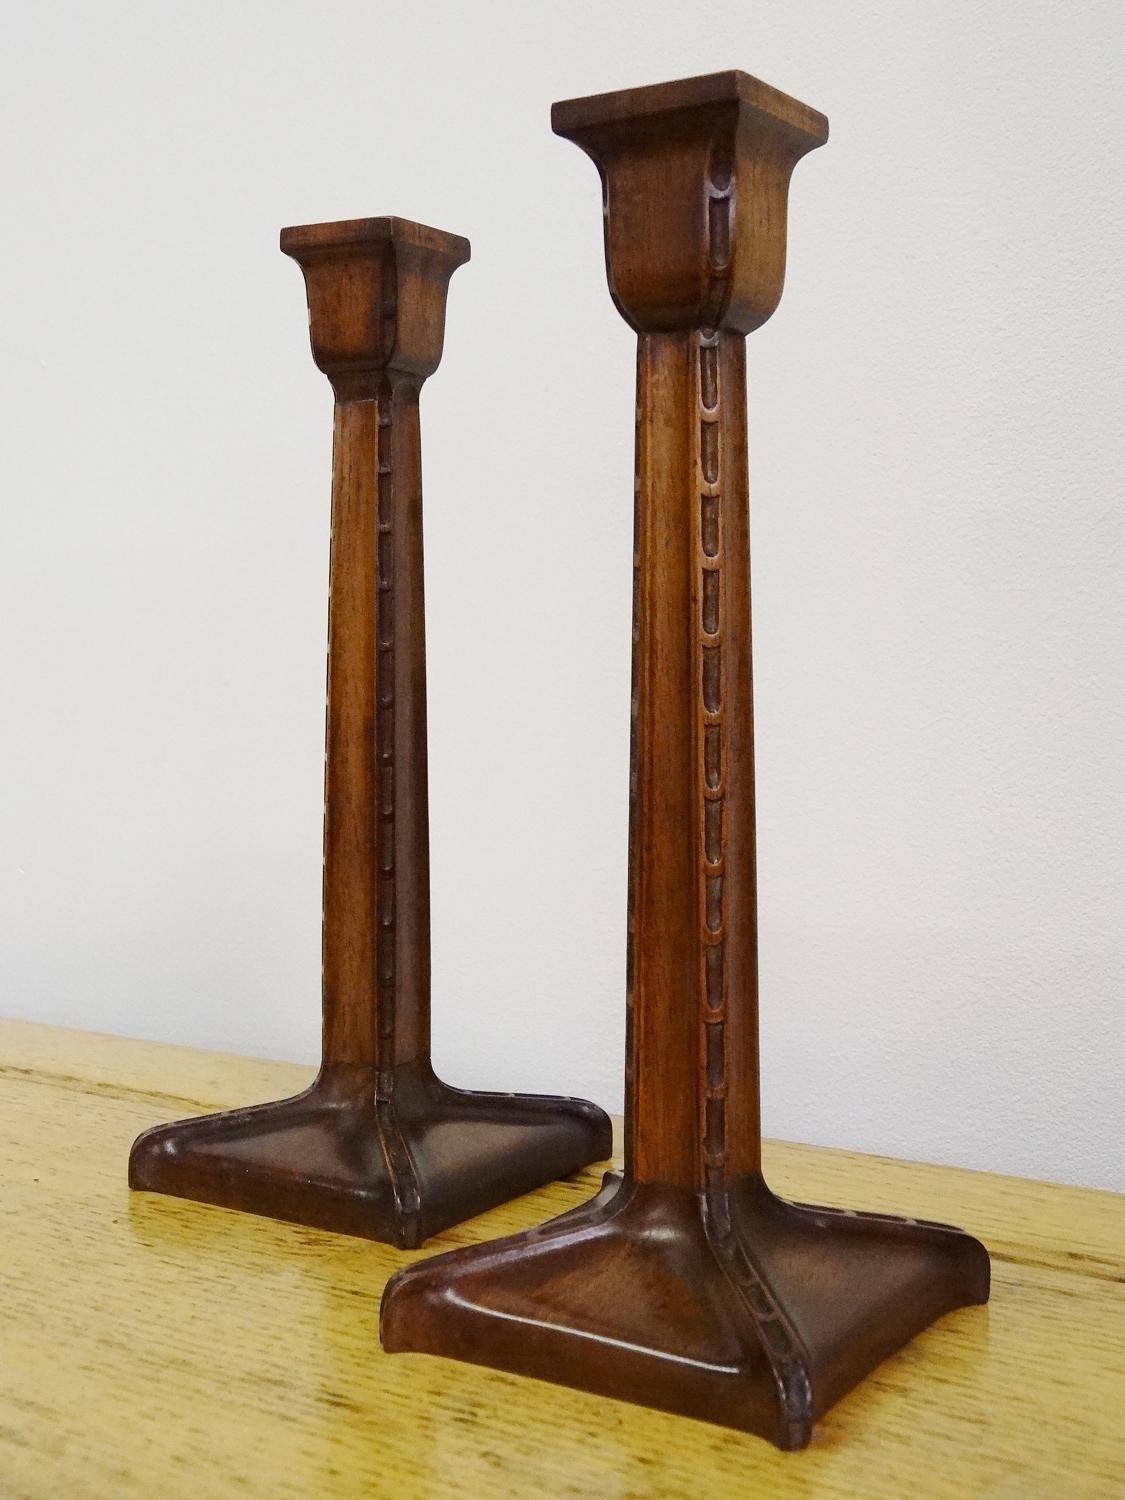 Cotswold School pair of candlesticks